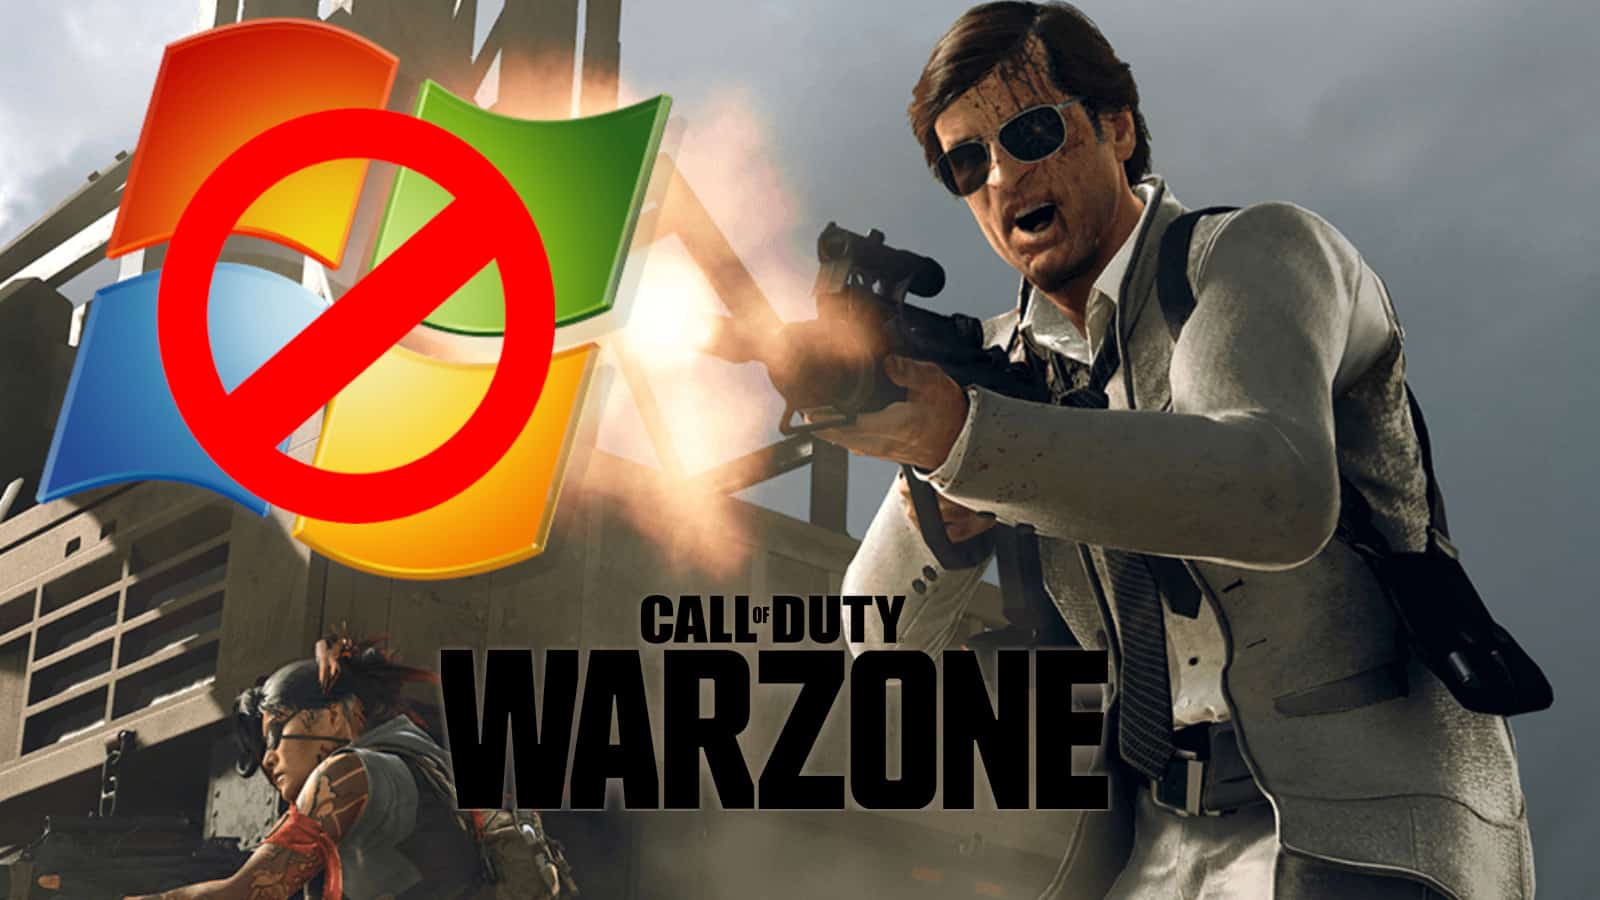 Windows 7 removed from warzone